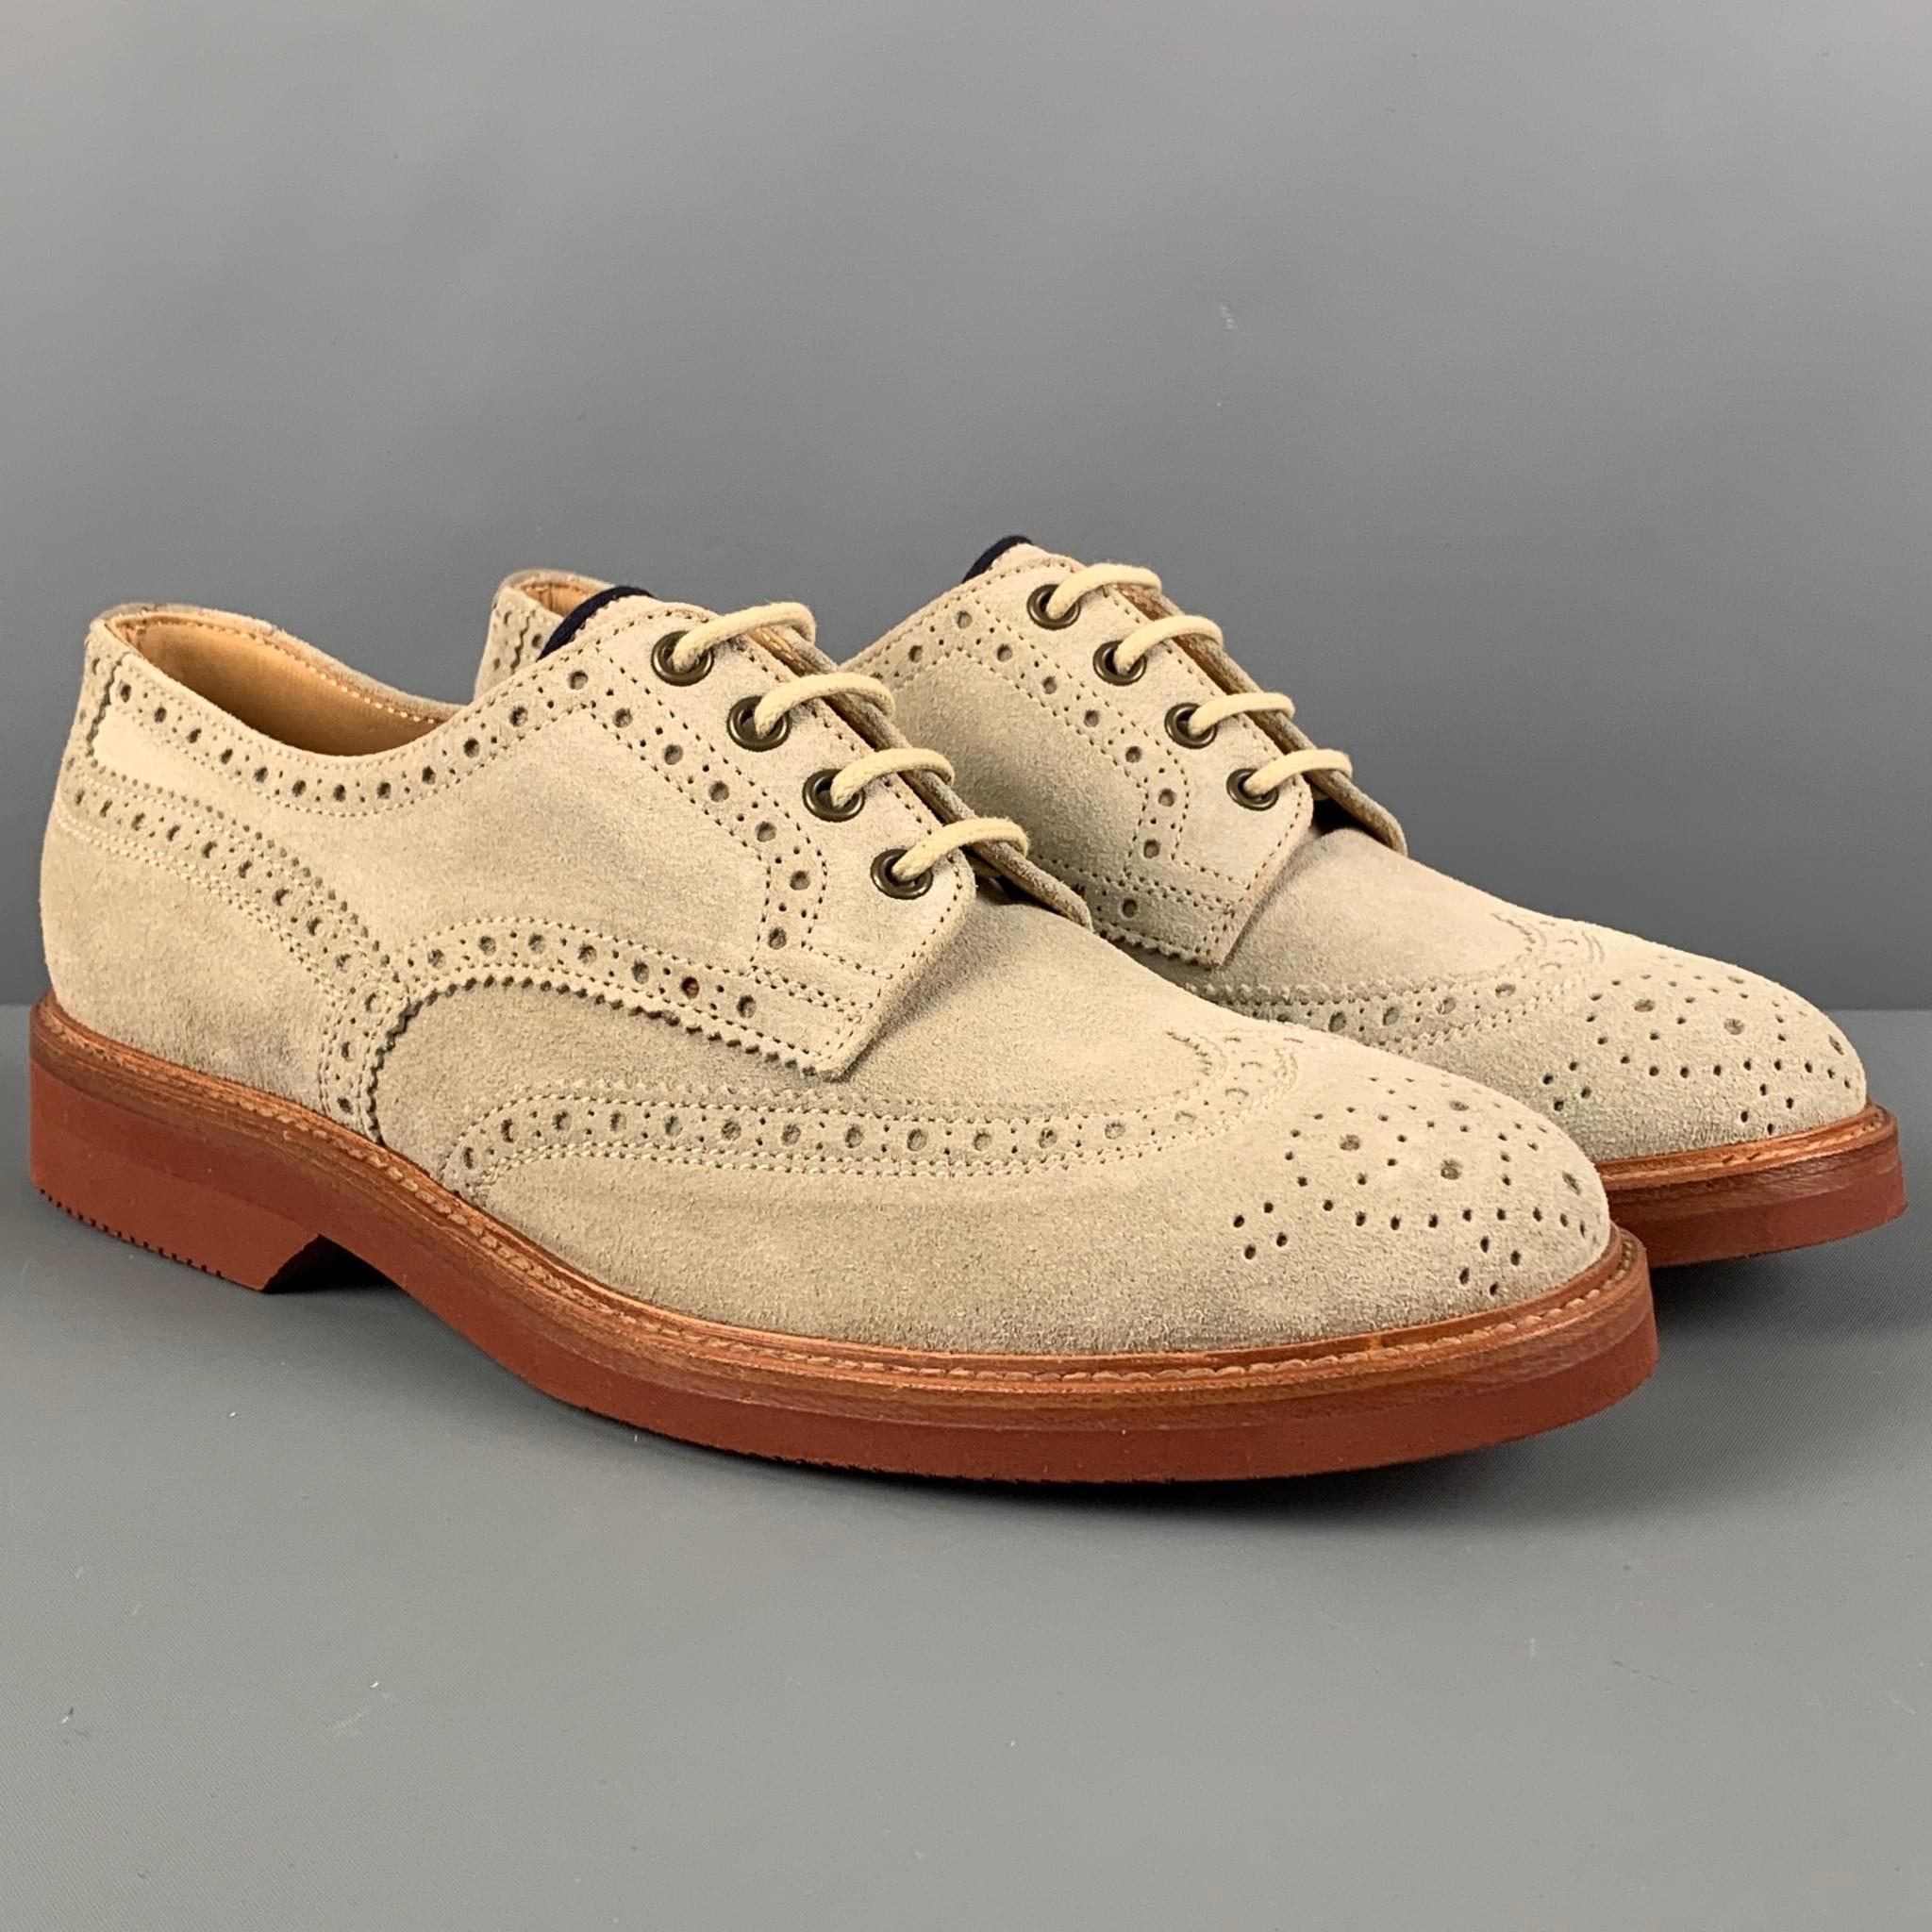 BRUNELLO CUCINELLI shoes comes in a beige suede featuring a wingtip style, brown sole, and a lace up closure. Made in Italy. 

New with box.
Marked: 42.5

Outsole: 12 in. x 4.25 in.
 